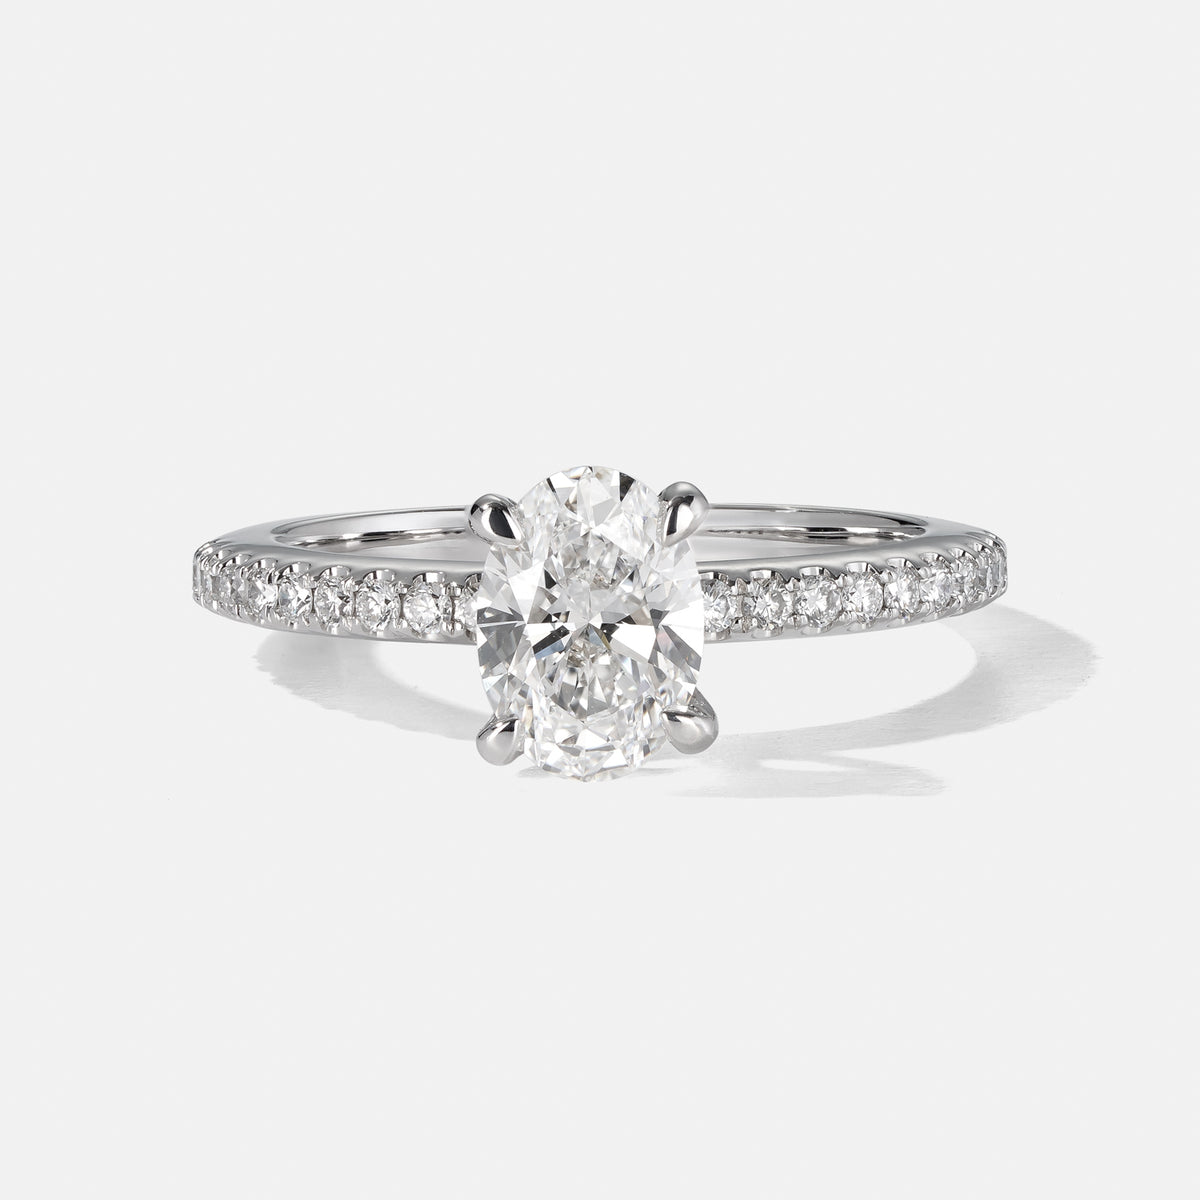 Oval 4 Claw Engagement Ring Diamond on shoulders